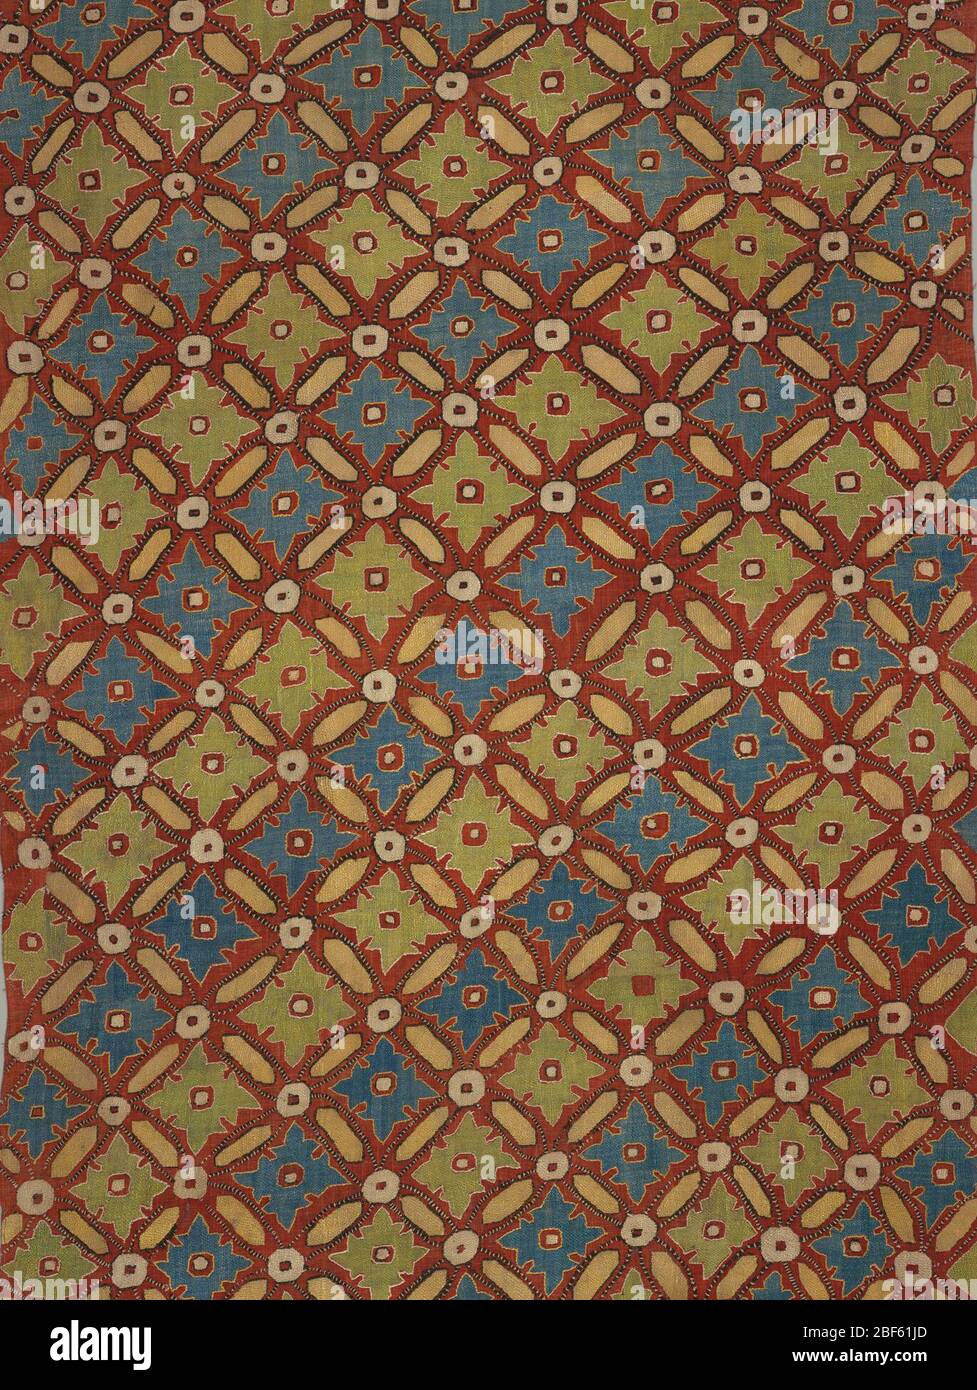 Panel. On a loosely woven red tabby ground, blue, pale green, white and buff silks in bukhara couching stitch form an all-over diagonal trellis pattern enclosing large diamond forms with leaf outlines in whose centers are reserved small squares. Stock Photo